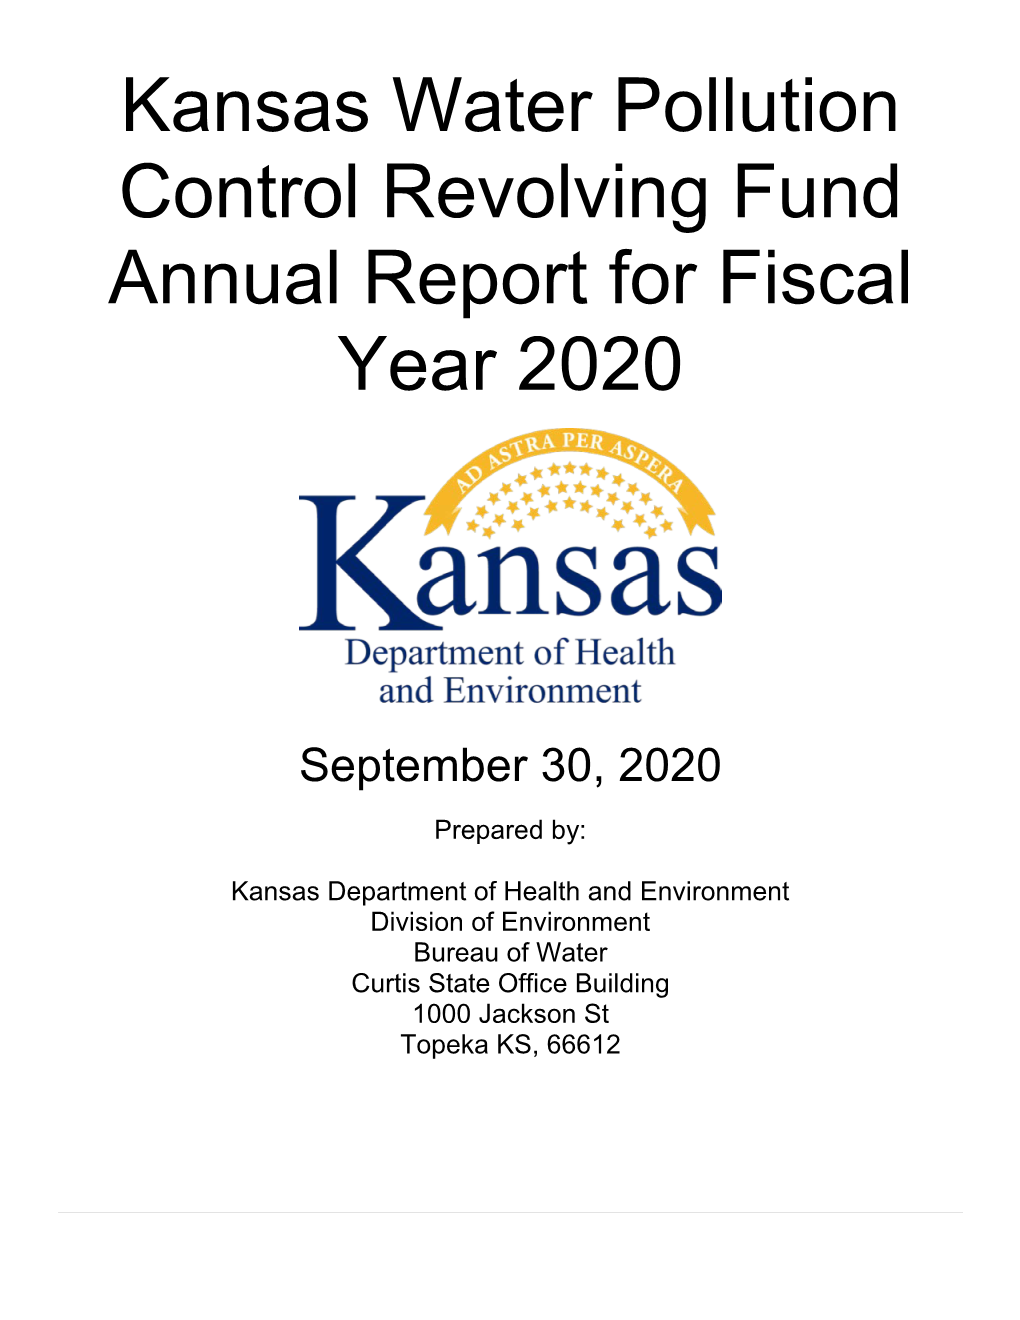 2020 Kansas Water Pollution Control Revolving Fund Annual Report